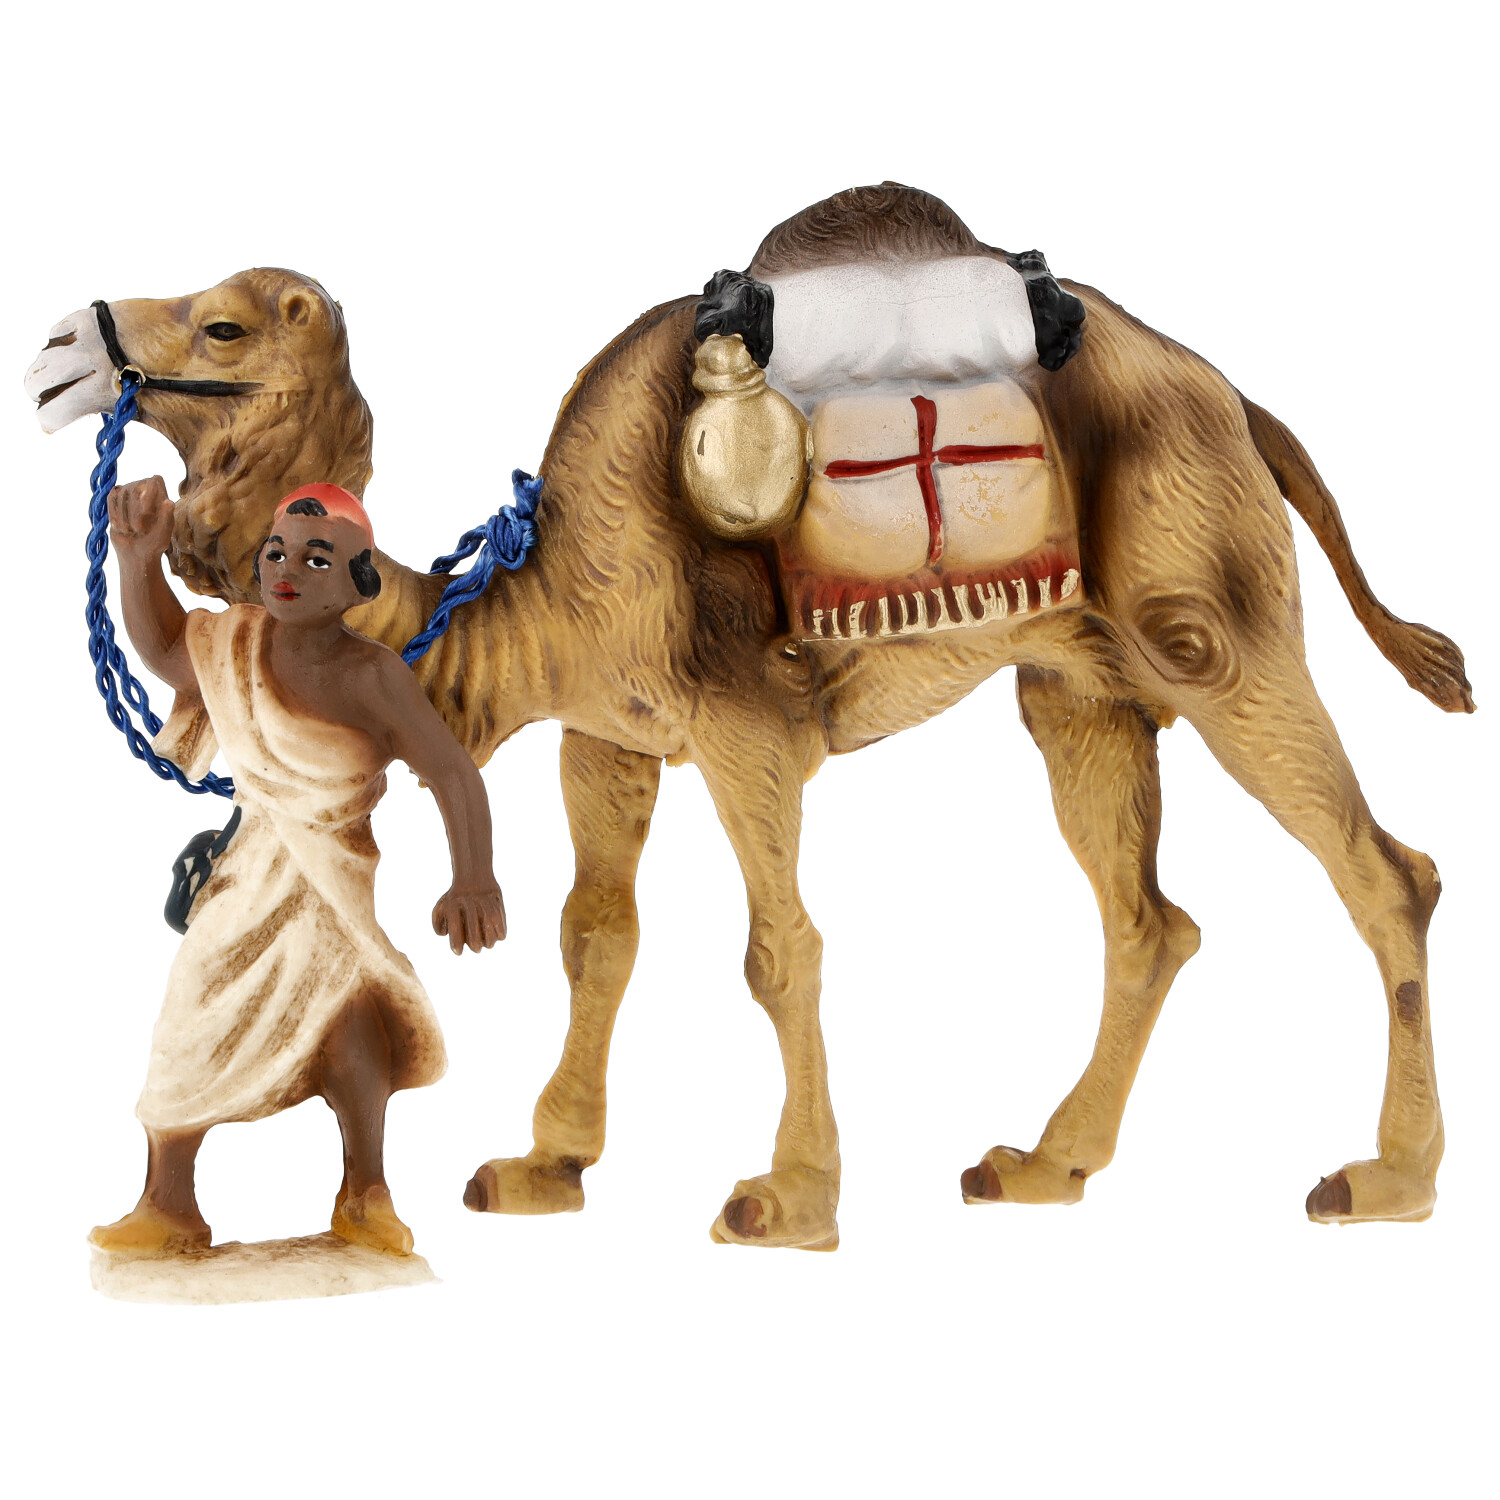 Bactrian camel with driver - Marolin Plastik - Resin Nativity figure - made in Germany